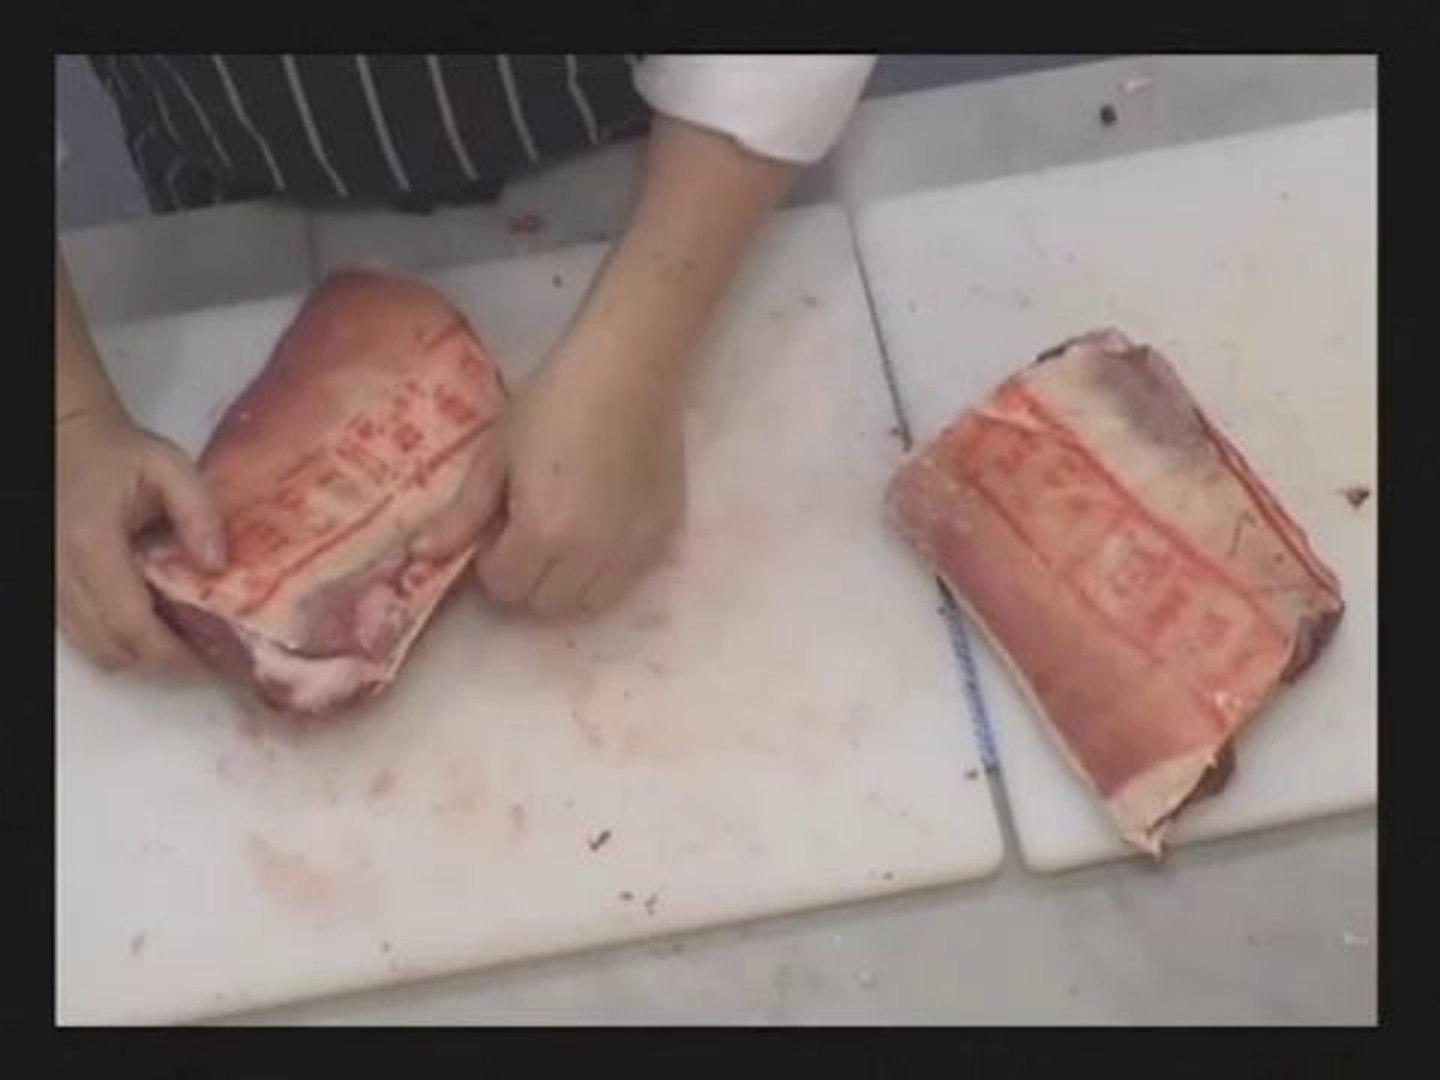 Cuts of Lambs Series - How to Prepare a Rack of Lamb Cutlets